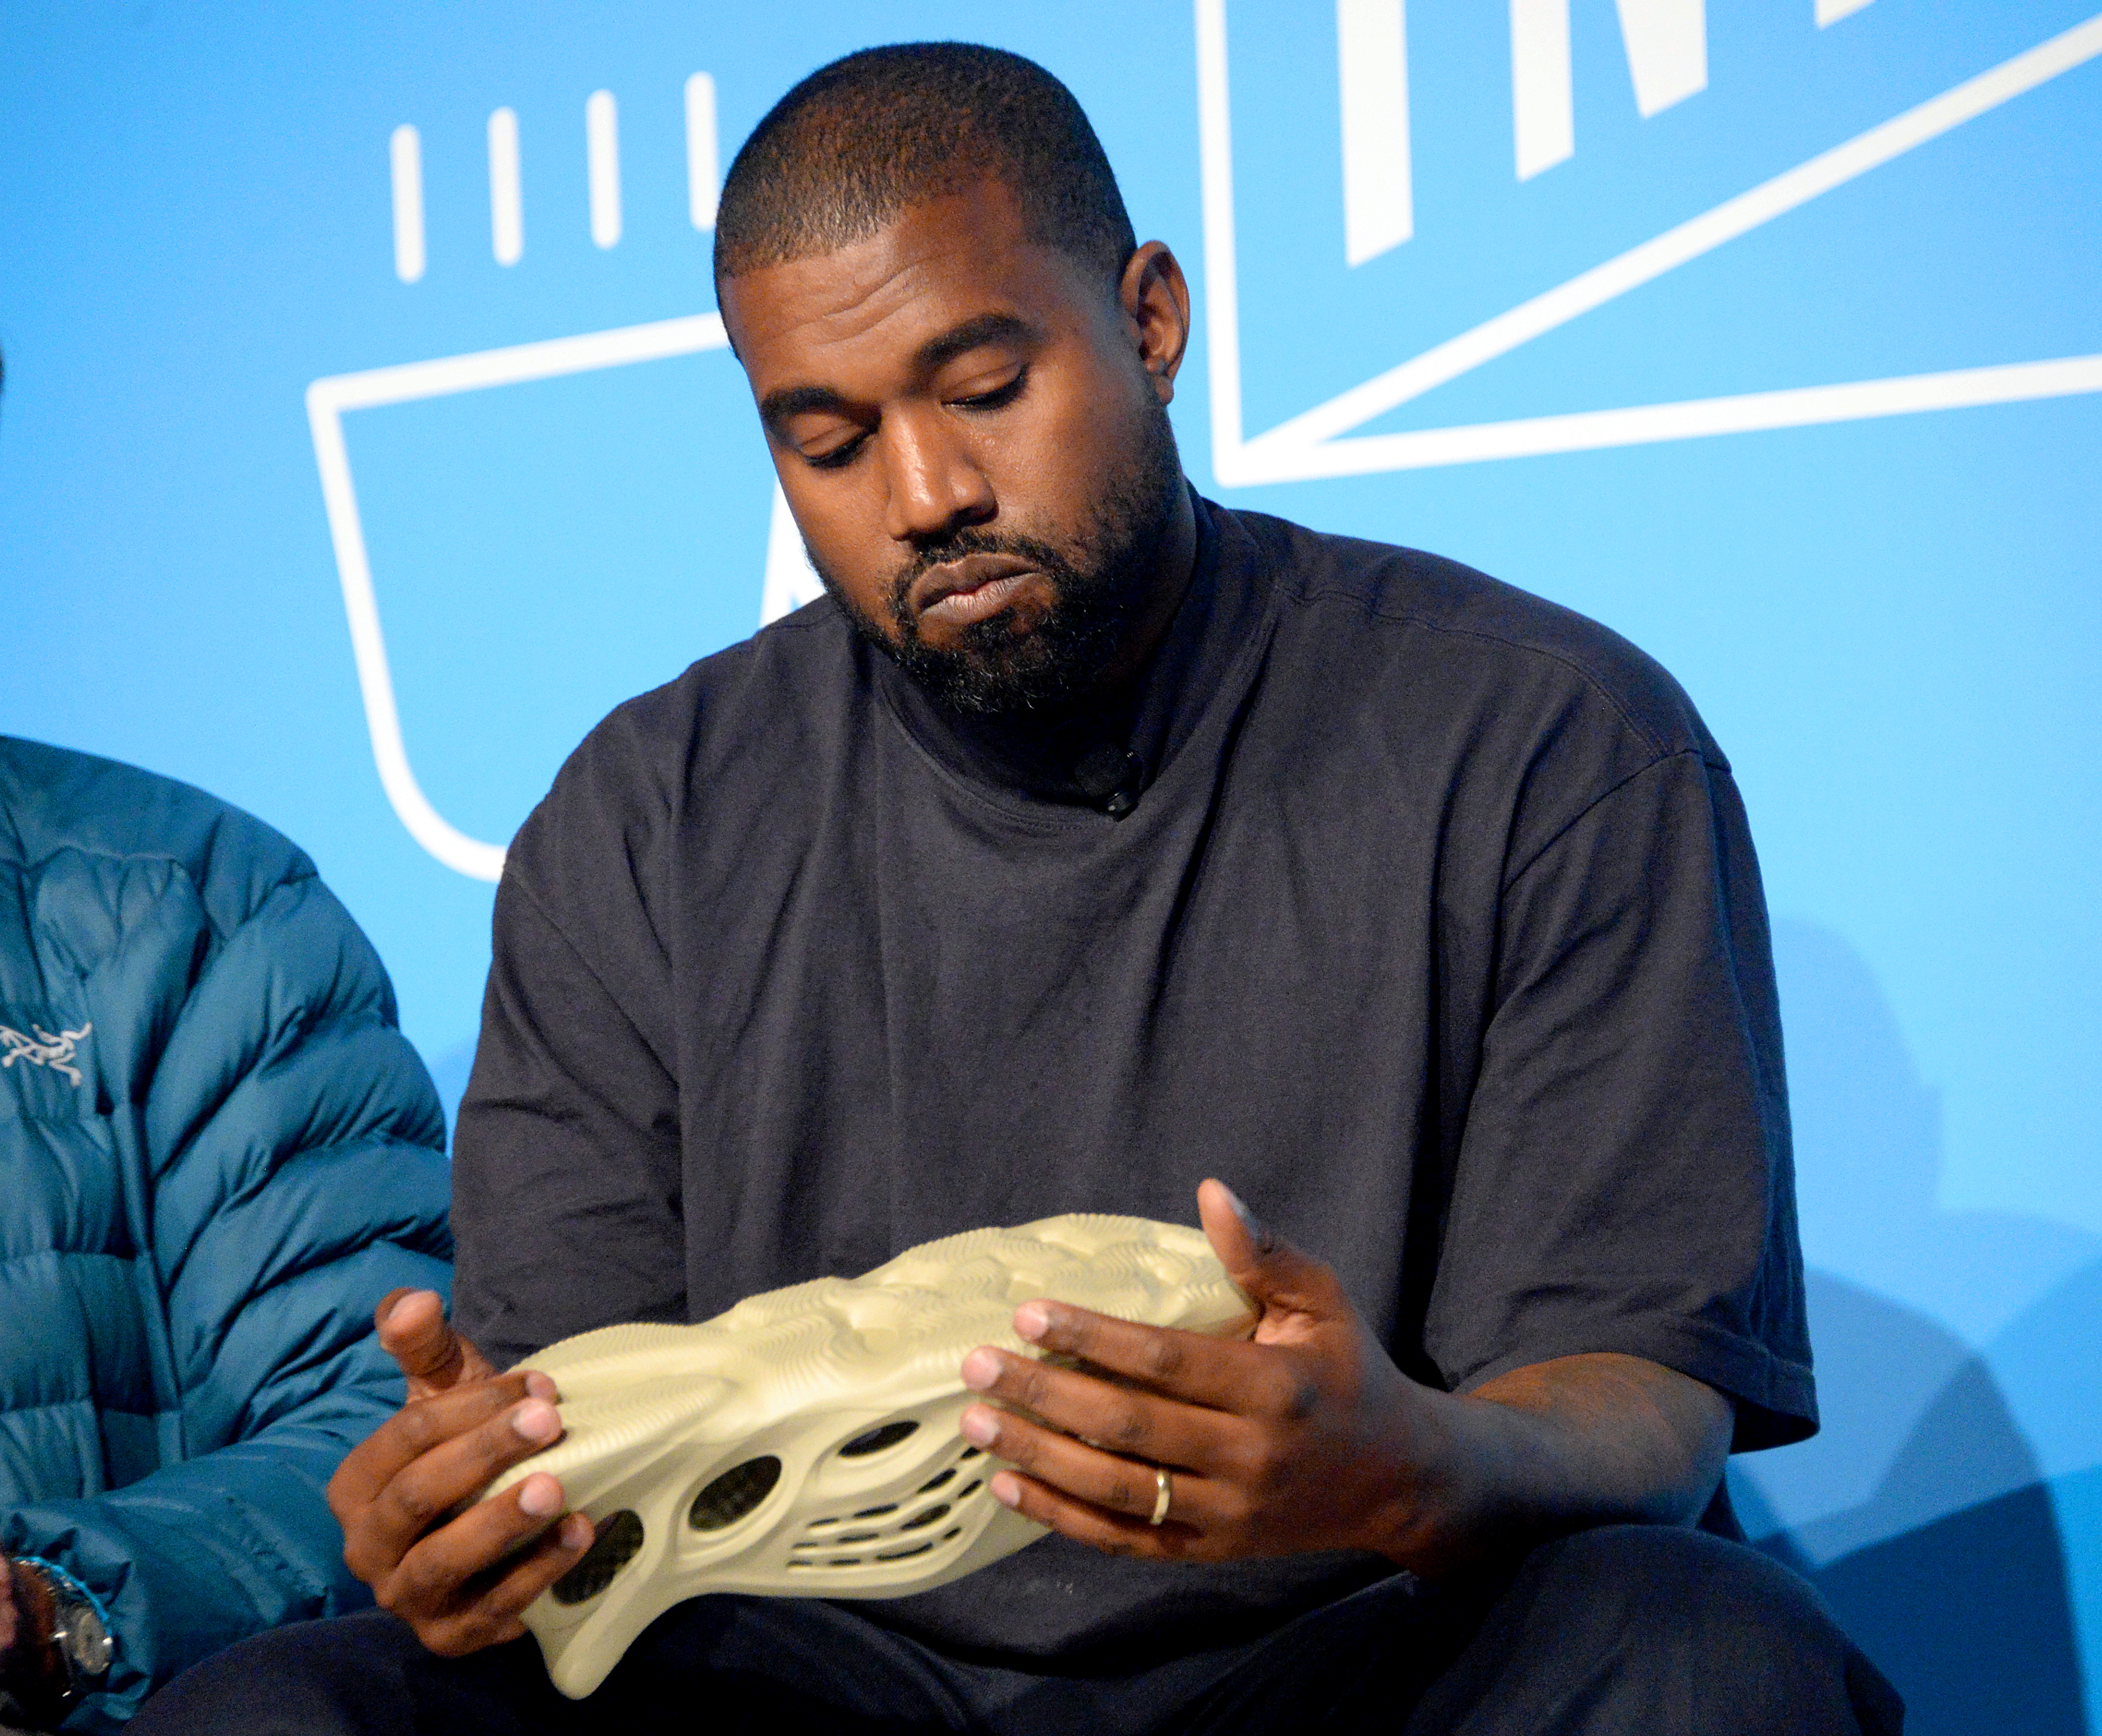 Kanye West Just Surprise Dropped the YEEZY Foam Runner